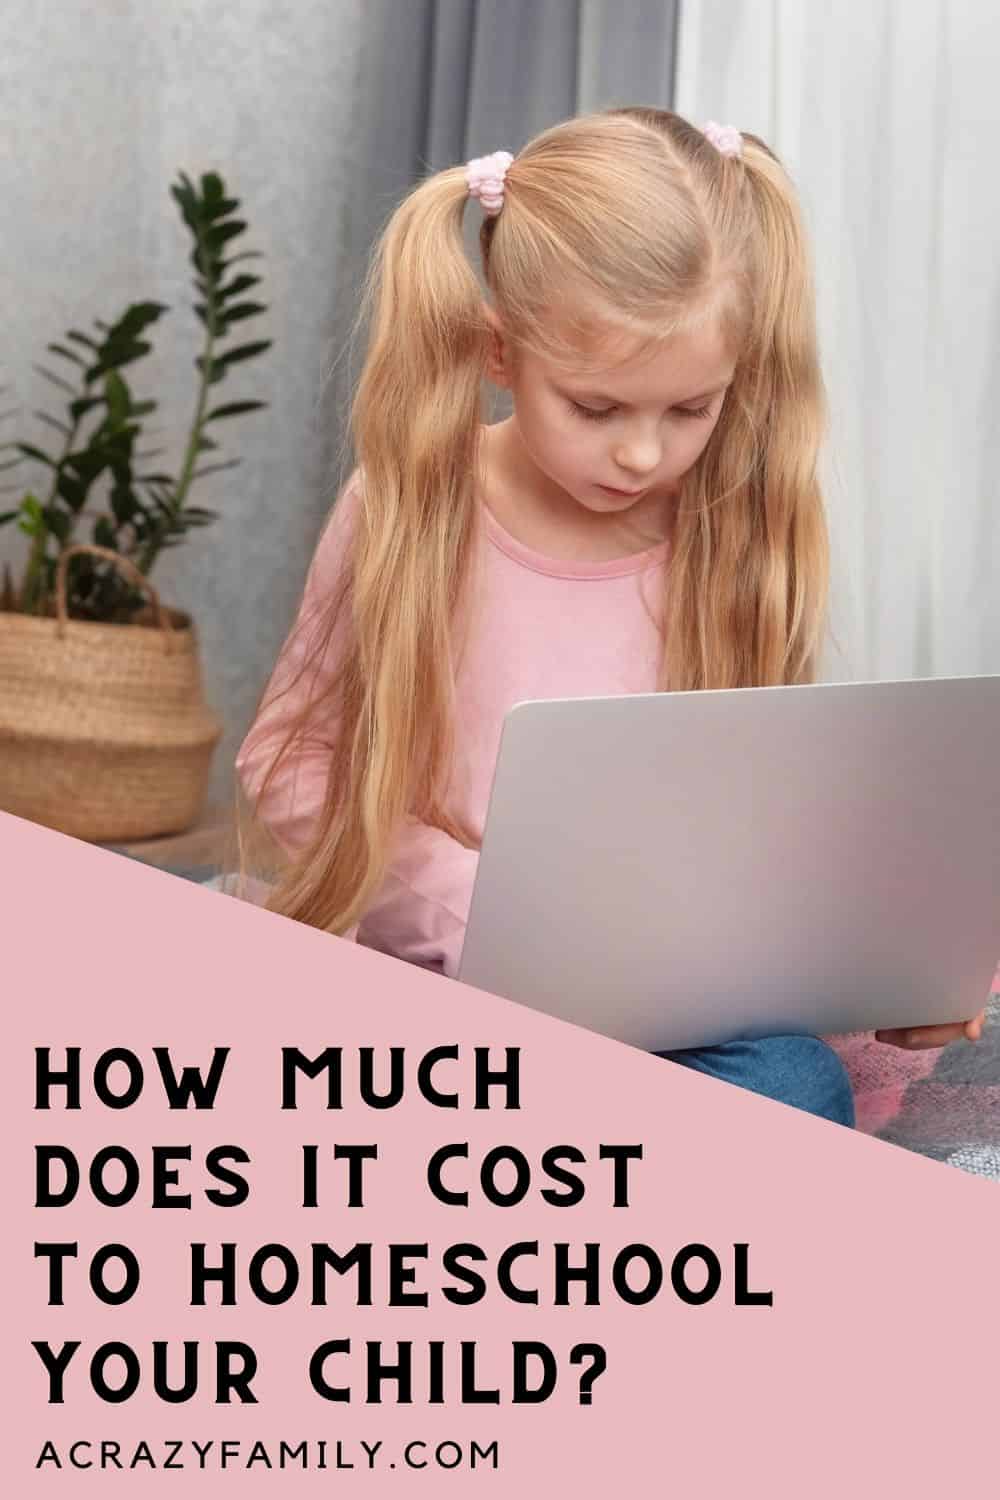 How much does it cost to homeschool your child